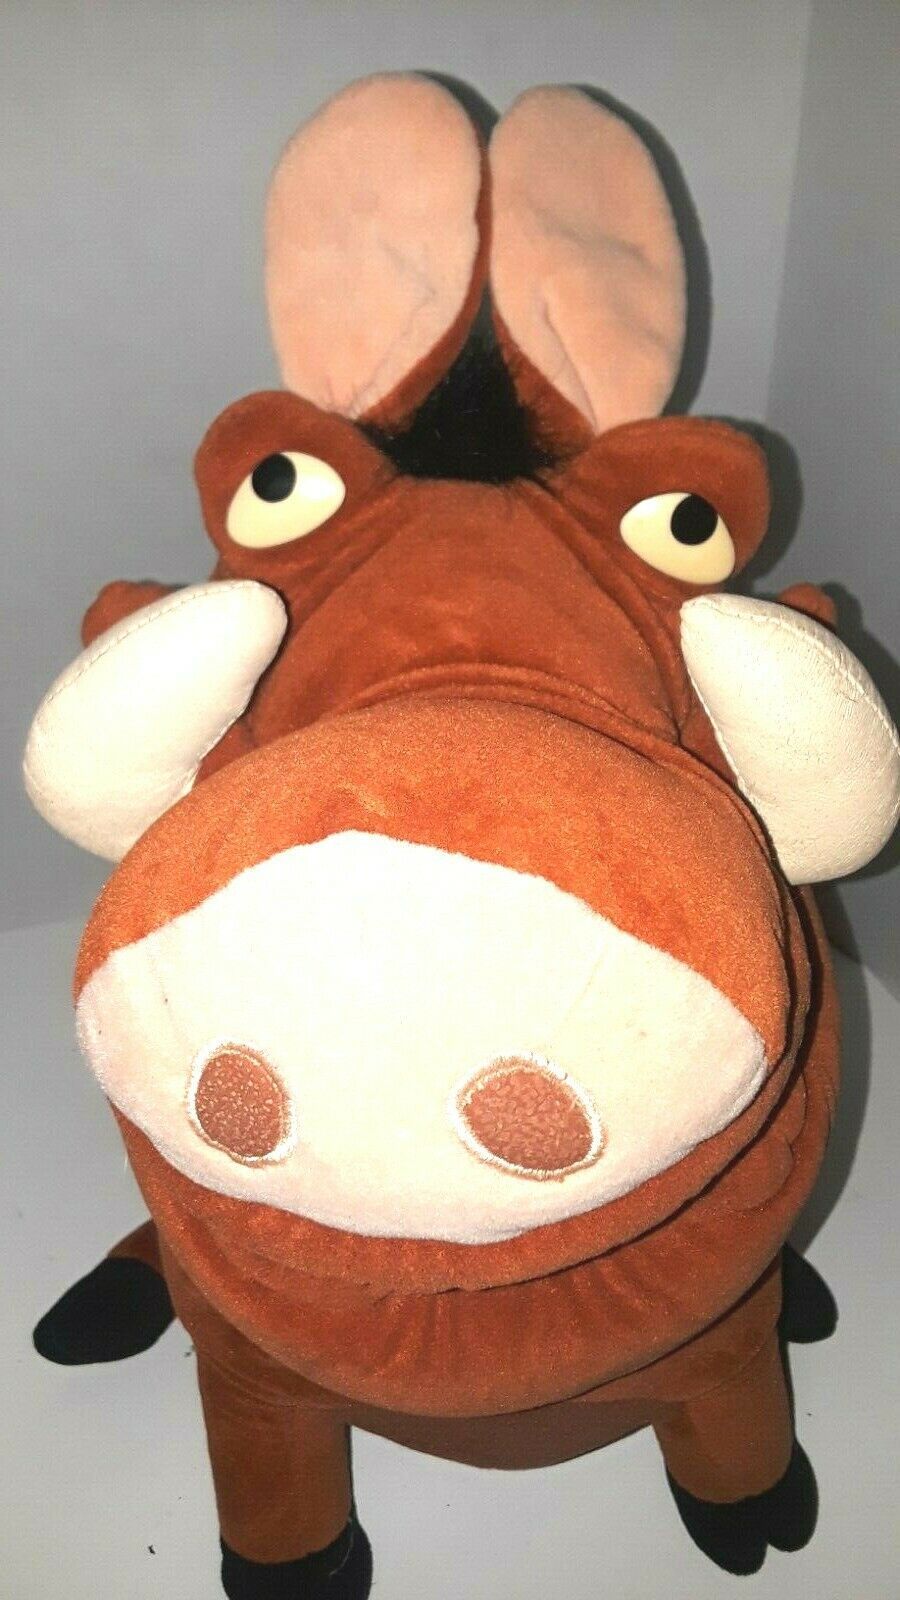 Primary image for Disney Licensed 19" Pumba Plush Doll from the Lion King